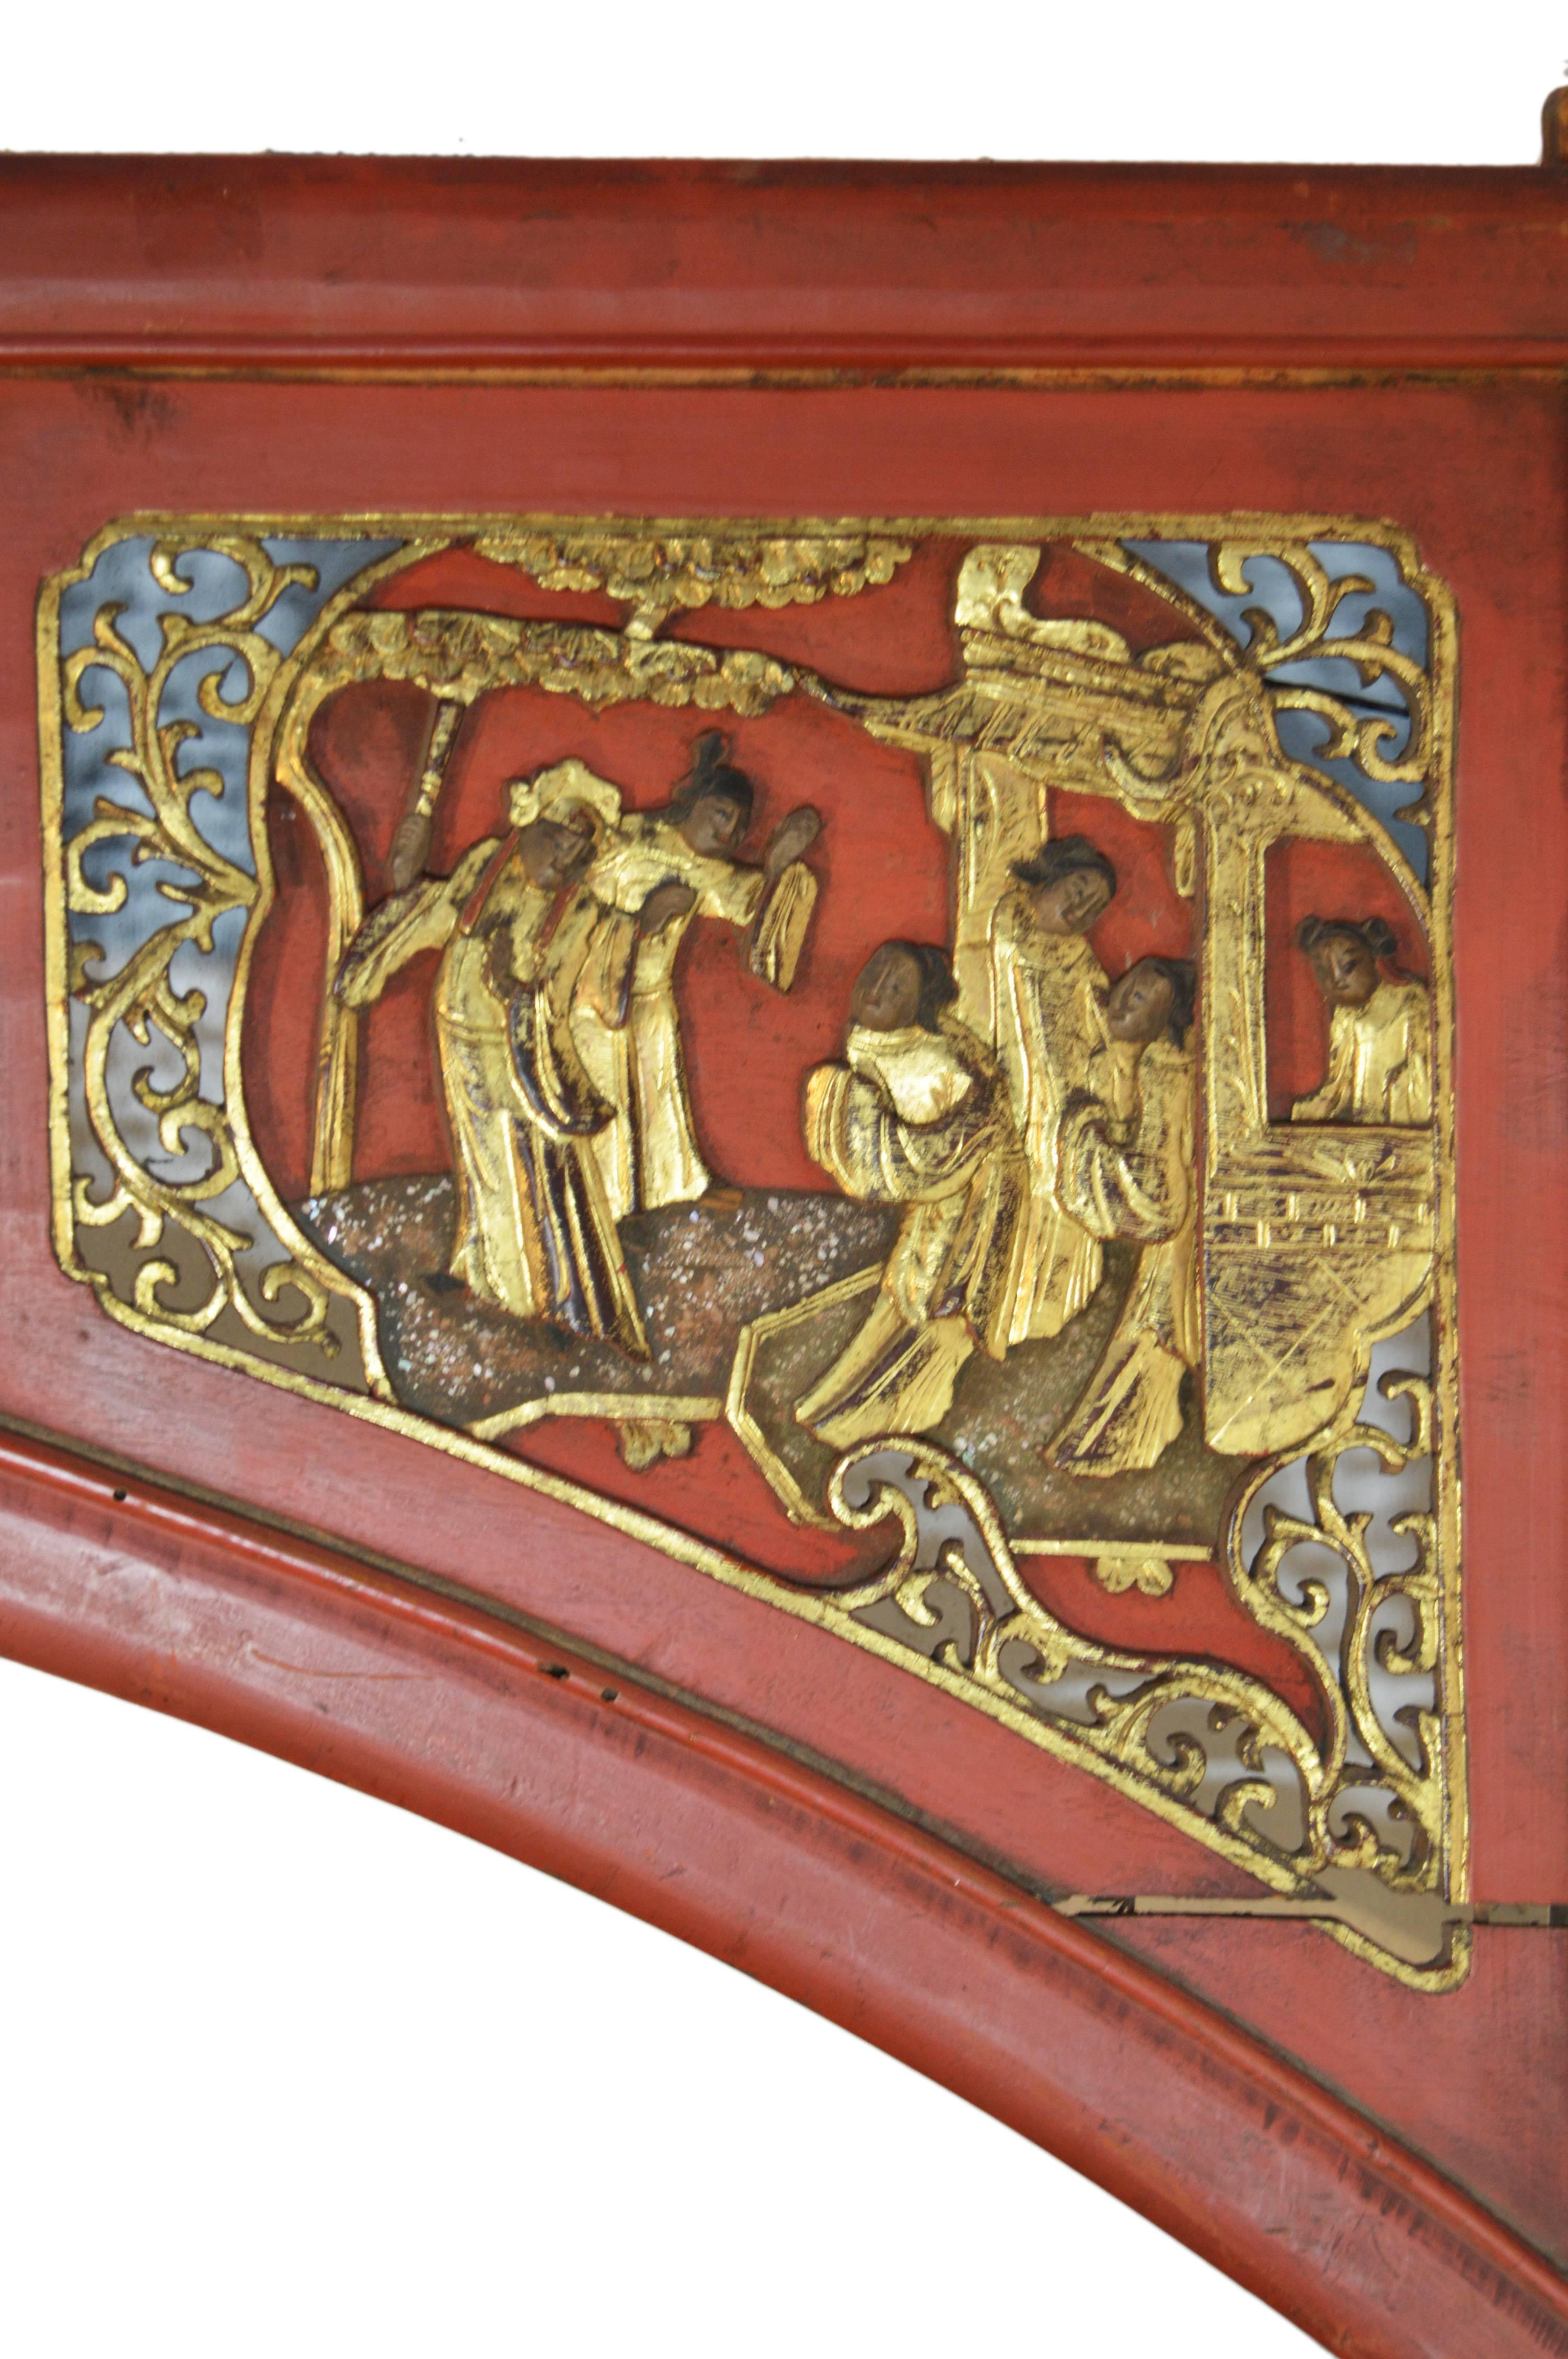 A 19th century Chinese sign with scenes, hand-carved from wood and painted. This large wooden sign, which may have sat above a doorway or even part of an elaborate bed, adopts a curved shape and features three compartments with scenes. This red